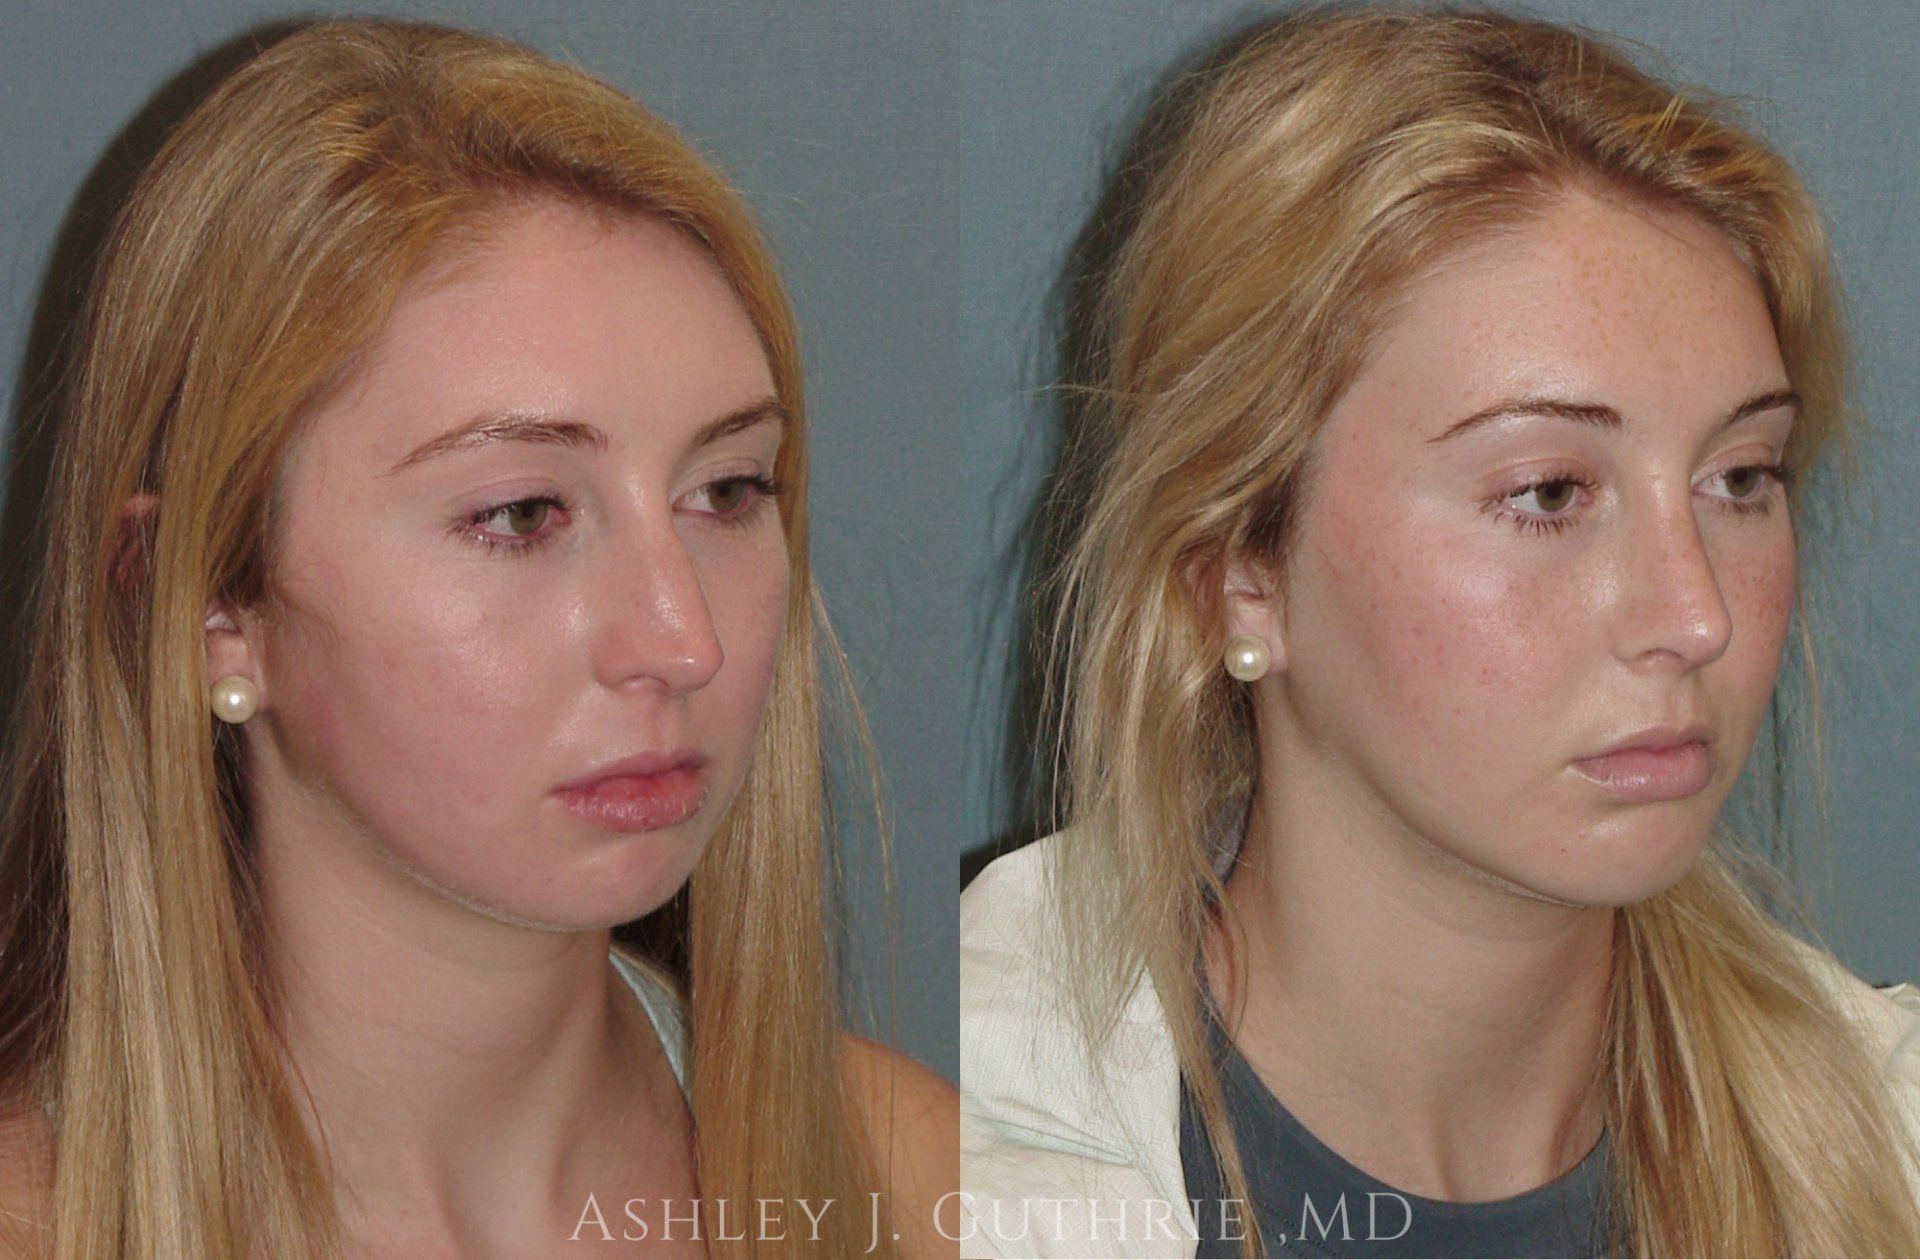 Guthrie Facial Plastic Surgery rhinoplasty patient before and after